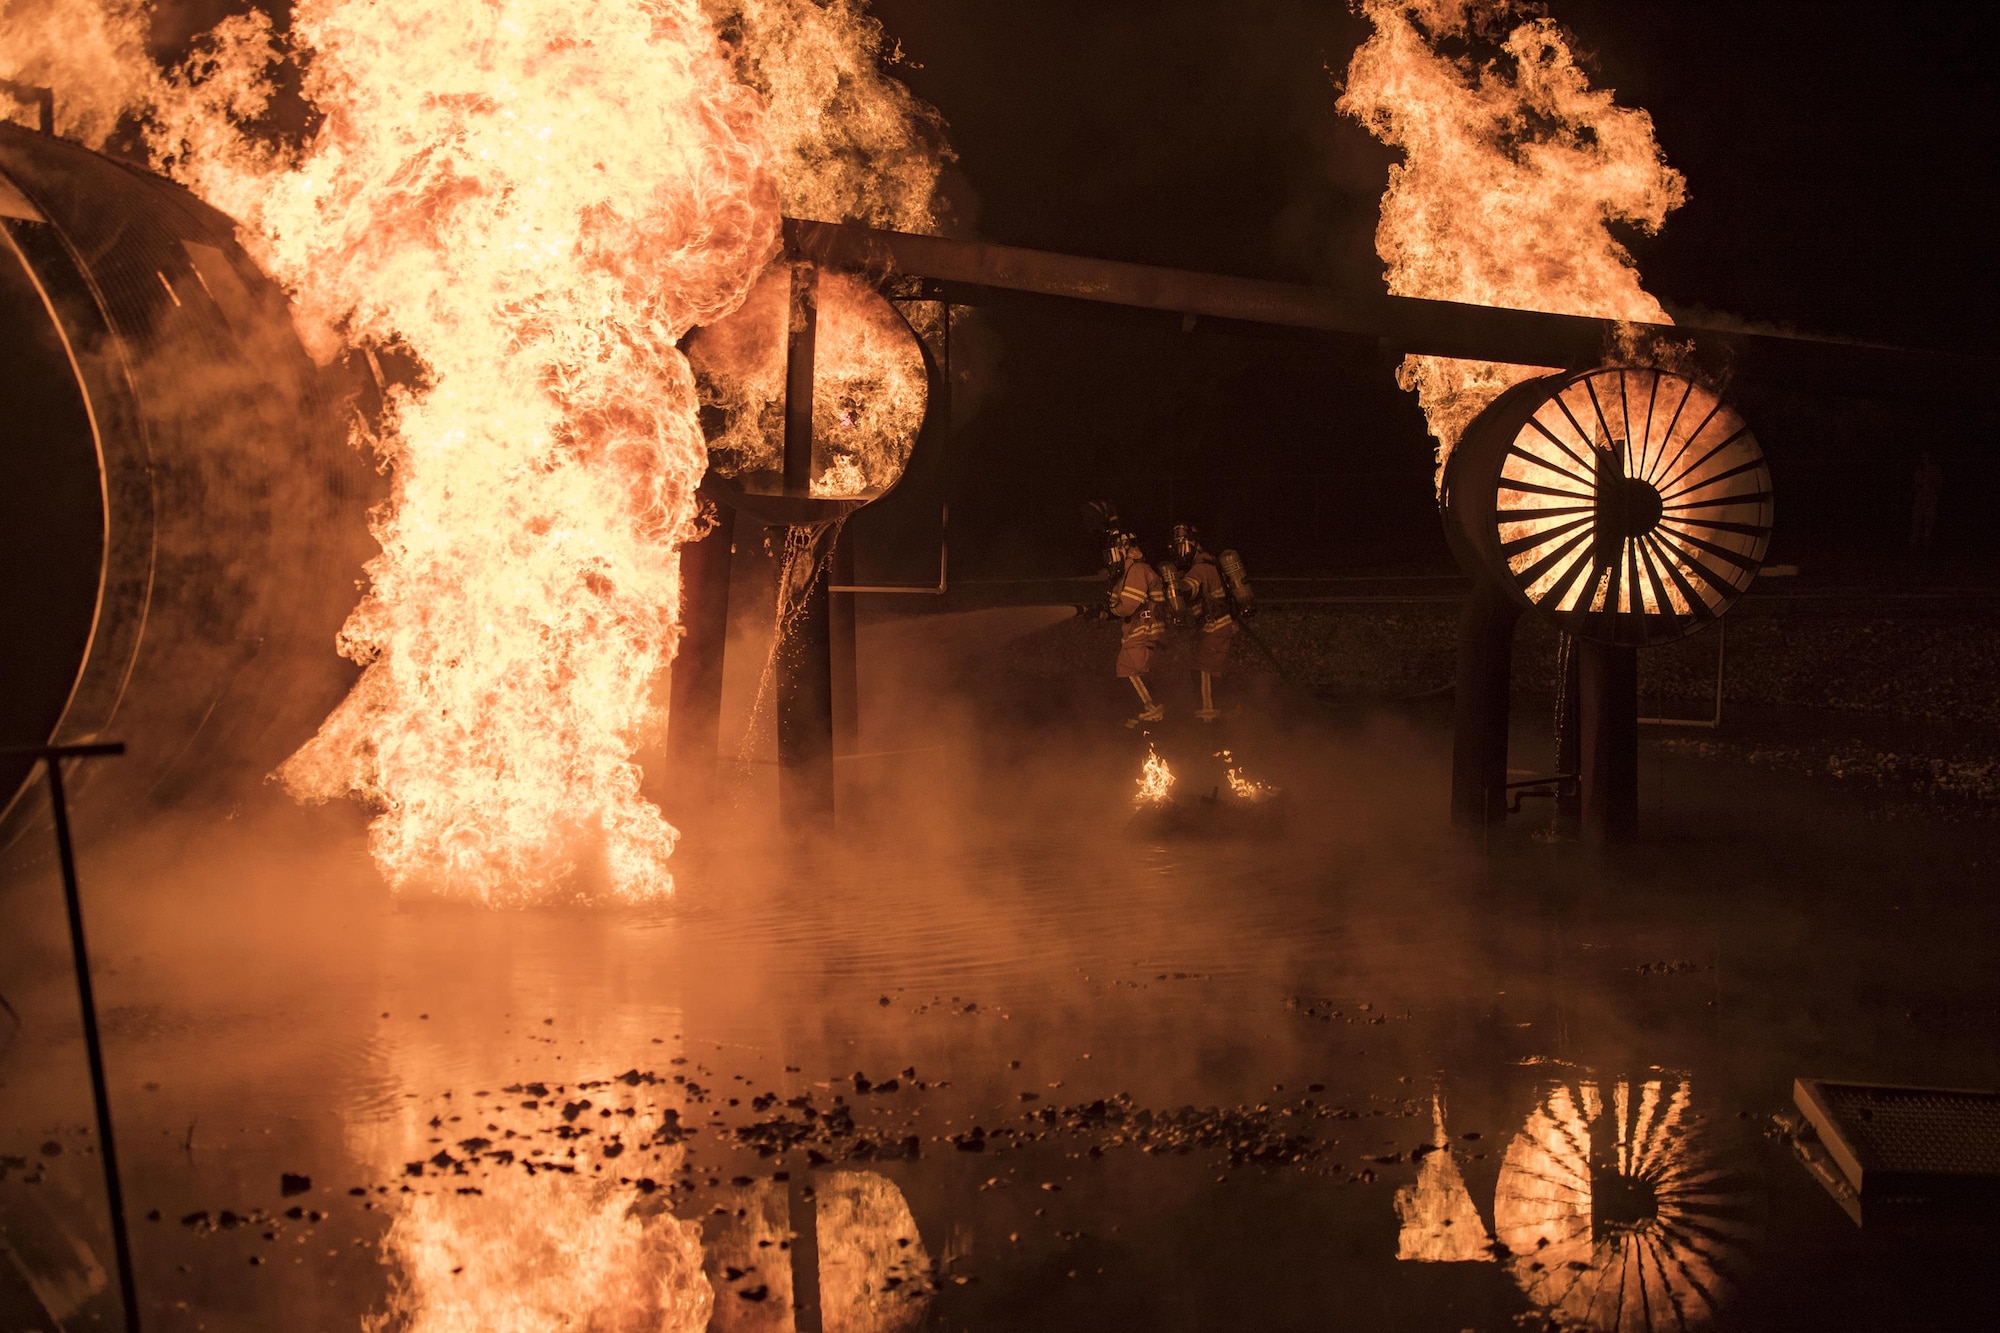 Firefighters from the 23d Civil Engineer Squadron douse flames during nighttime, live-fire training, Jan. 10, 2017, at Moody Air Force Base, Ga. All of Moody’s firefighters are required to perform this training at least once a year. (U.S. Air Force photo by Airman 1st Class Daniel Snider)